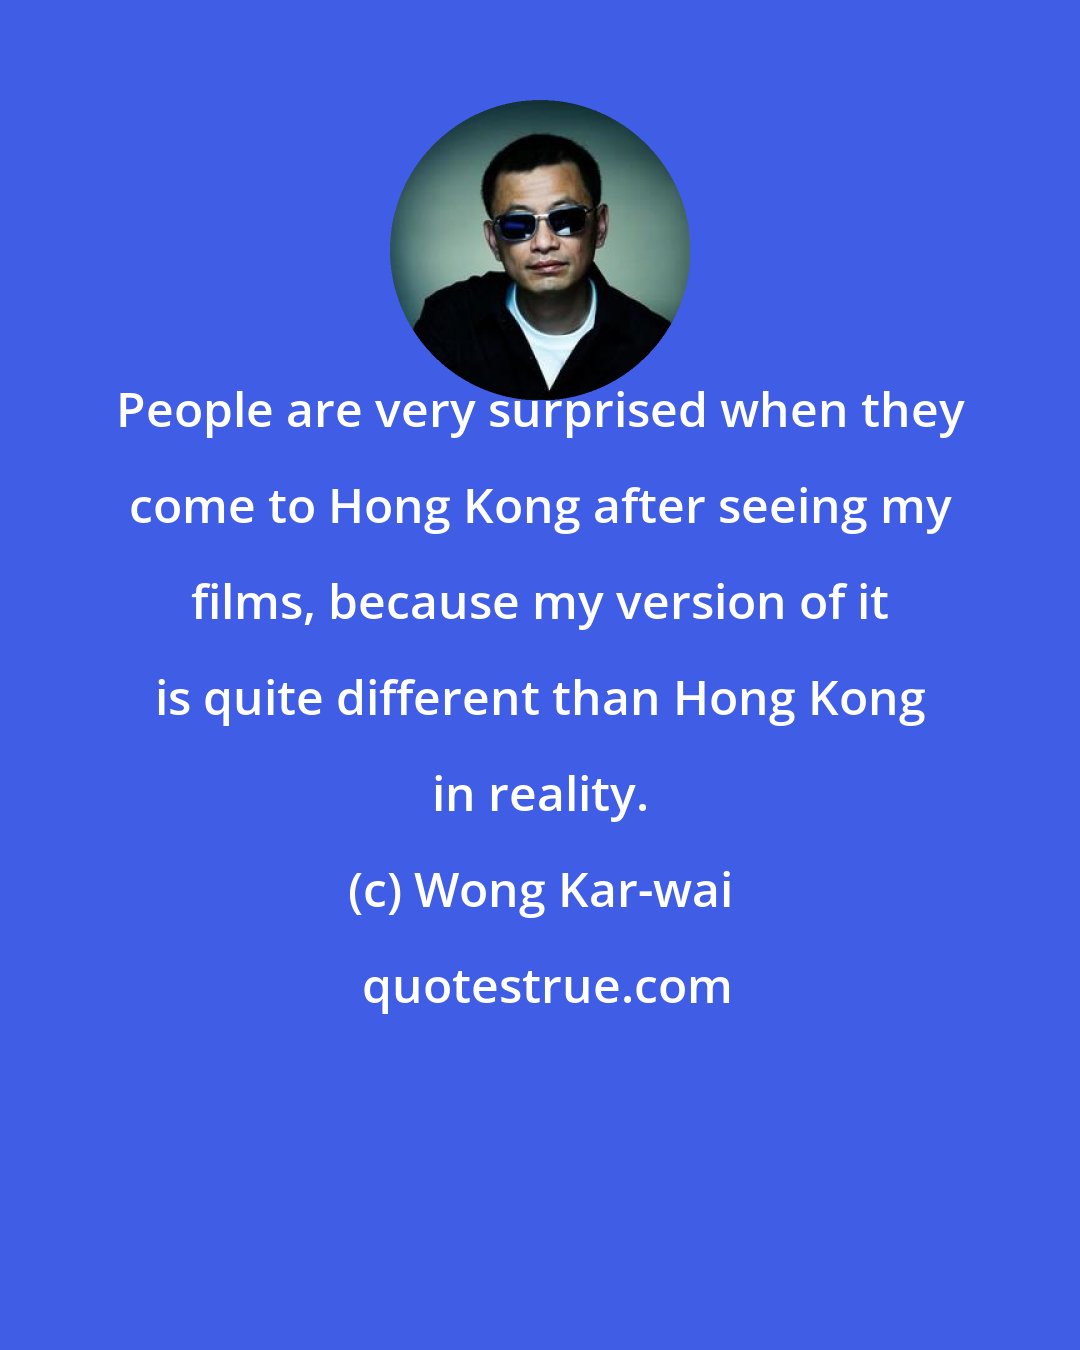 Wong Kar-wai: People are very surprised when they come to Hong Kong after seeing my films, because my version of it is quite different than Hong Kong in reality.